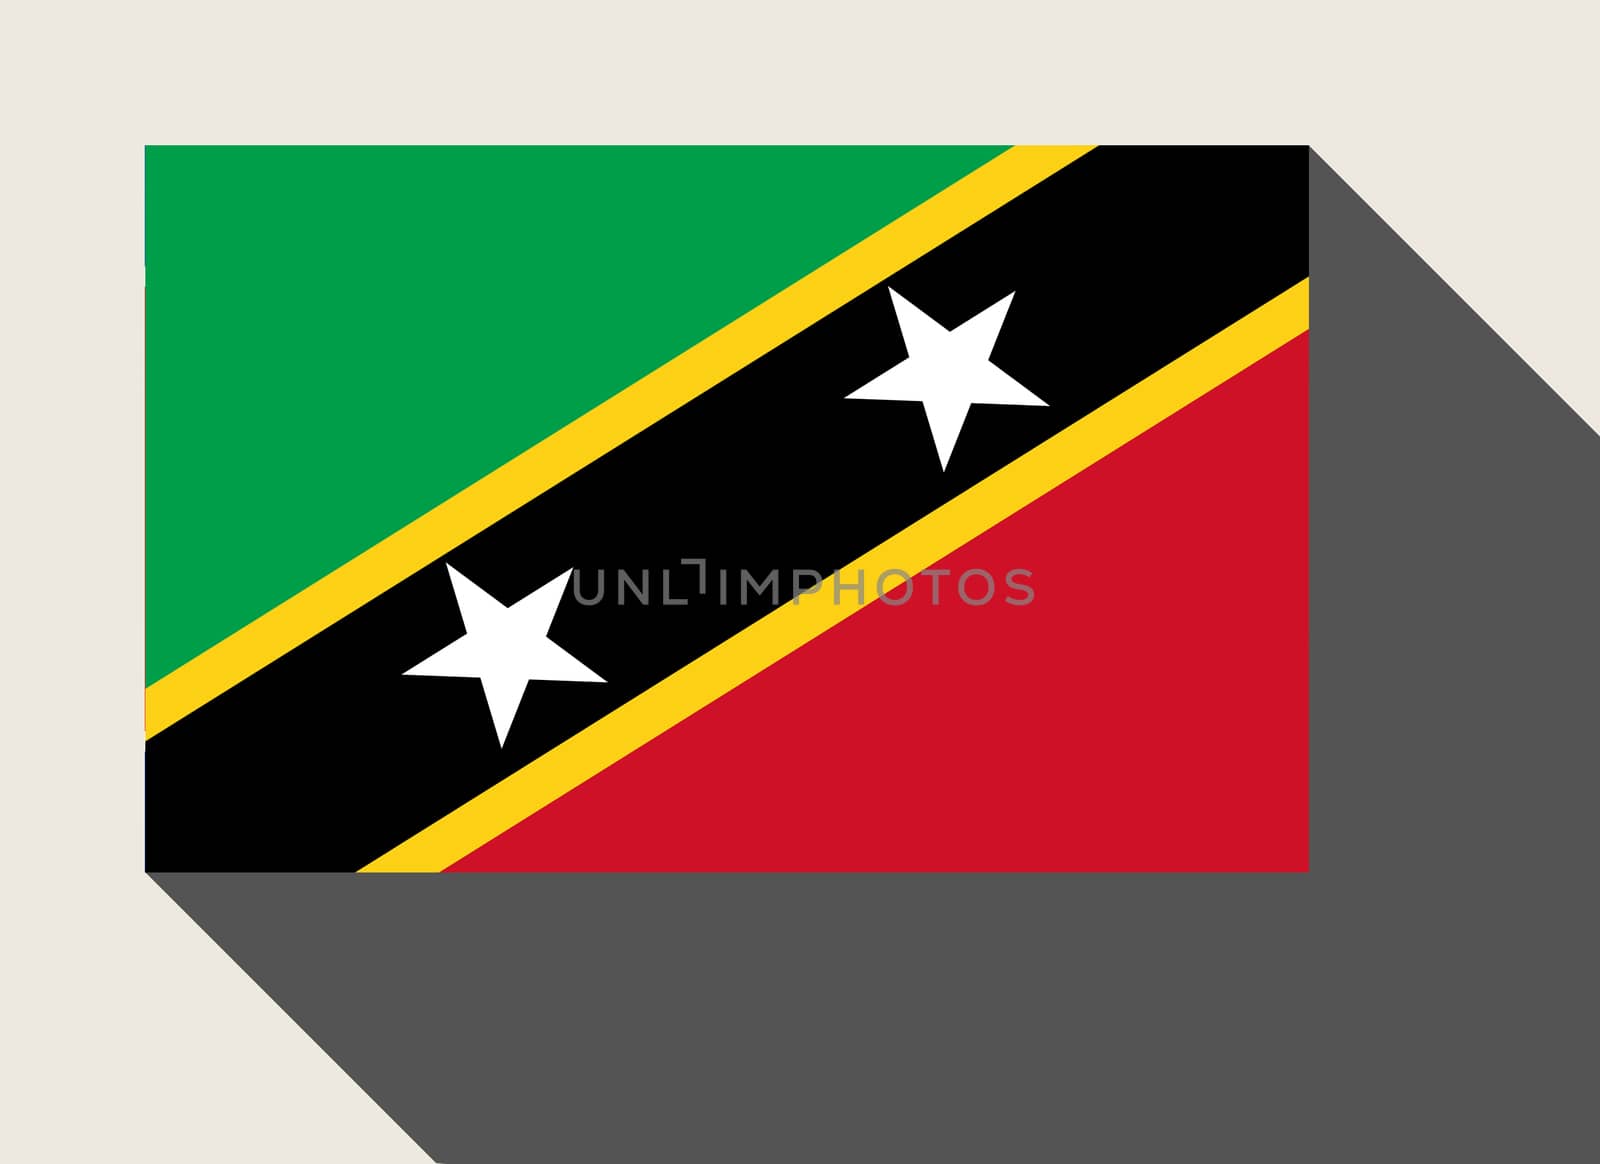 St Kitts and Nevis flag in flat web design style.